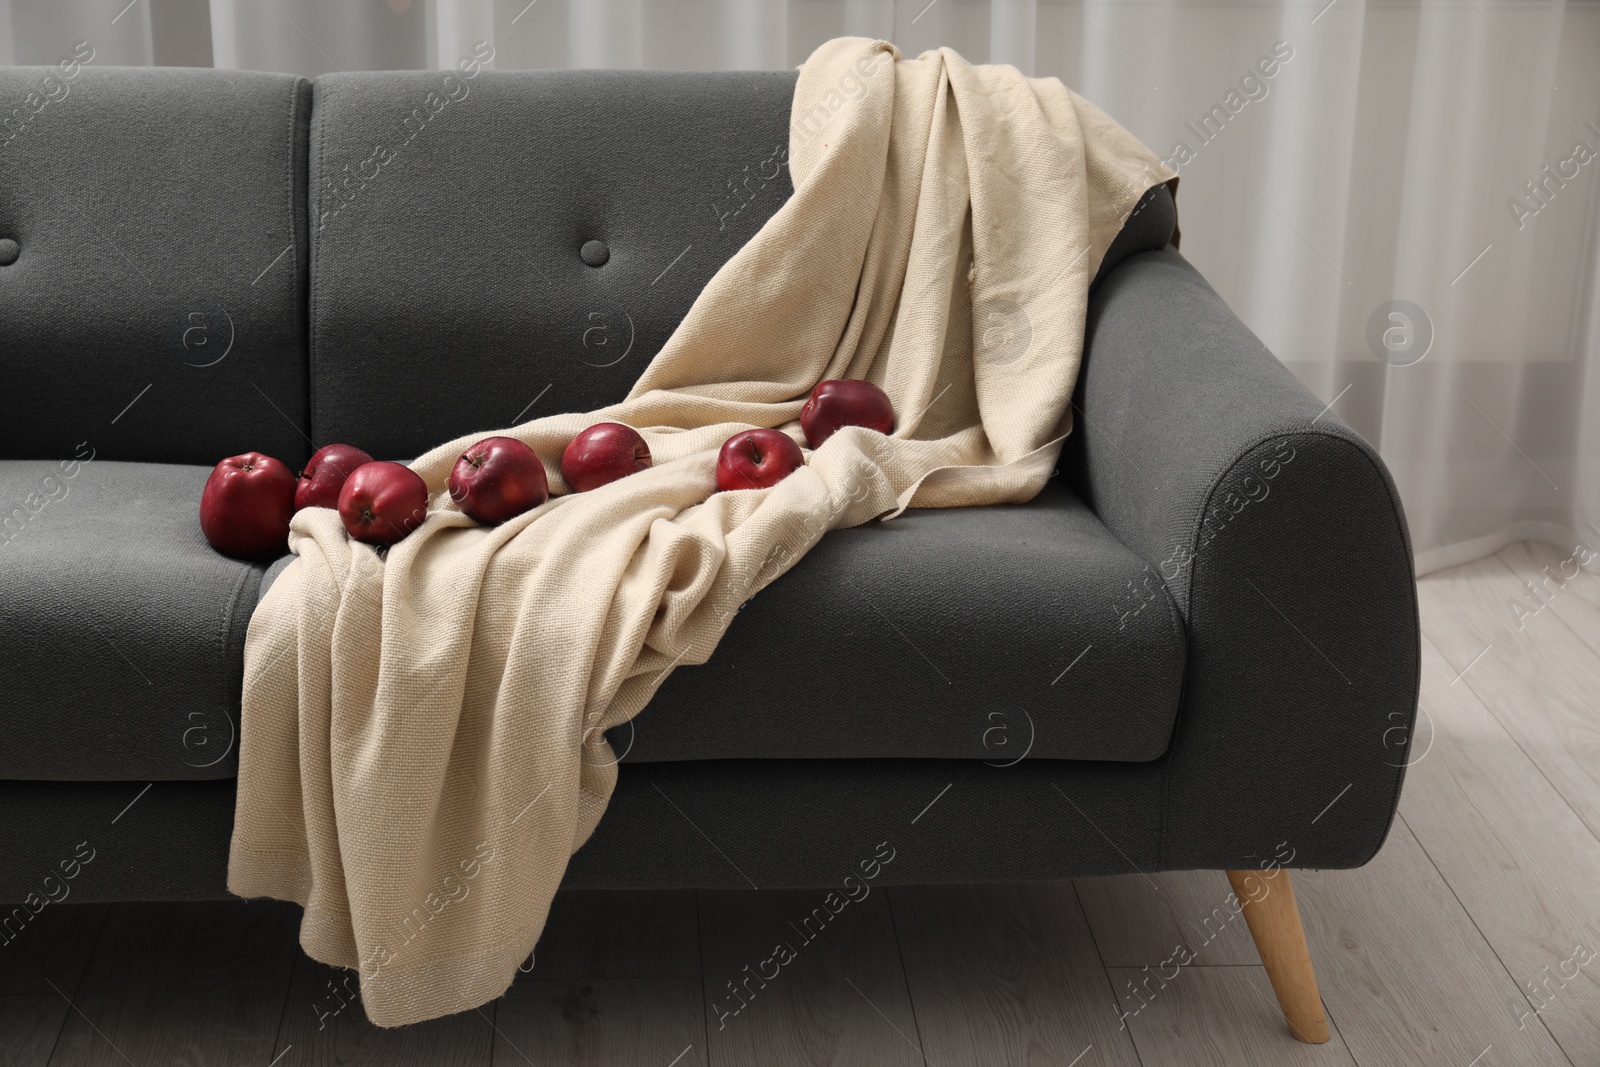 Photo of Red apples and beige blanket on grey sofa indoors